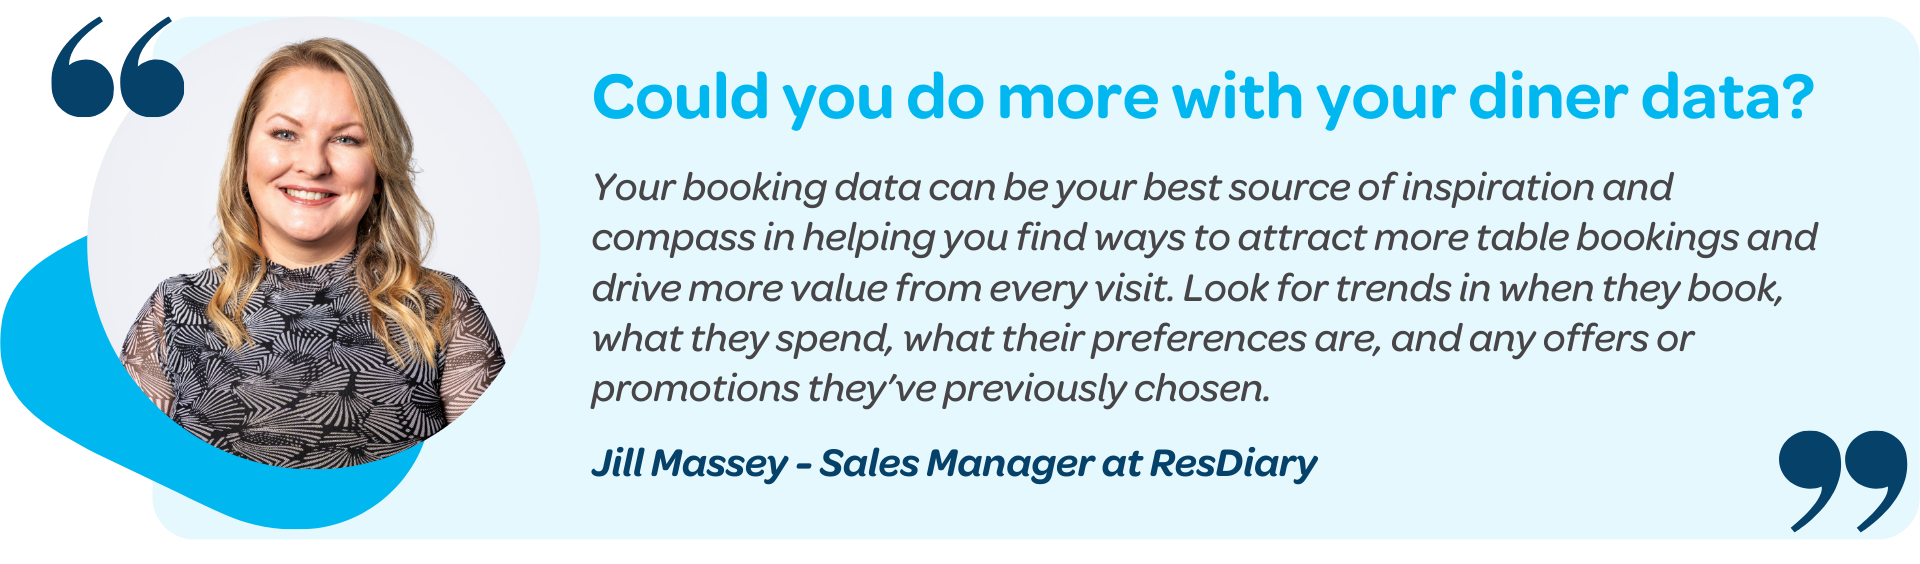 Your booking data can be your best source of inspiration and compass in helping you find ways to attract more table bookings and drive more value from every visit. Look for trends in when they book, what they spend, what their preferences are, and any offers or promotions they’ve previously chosen.